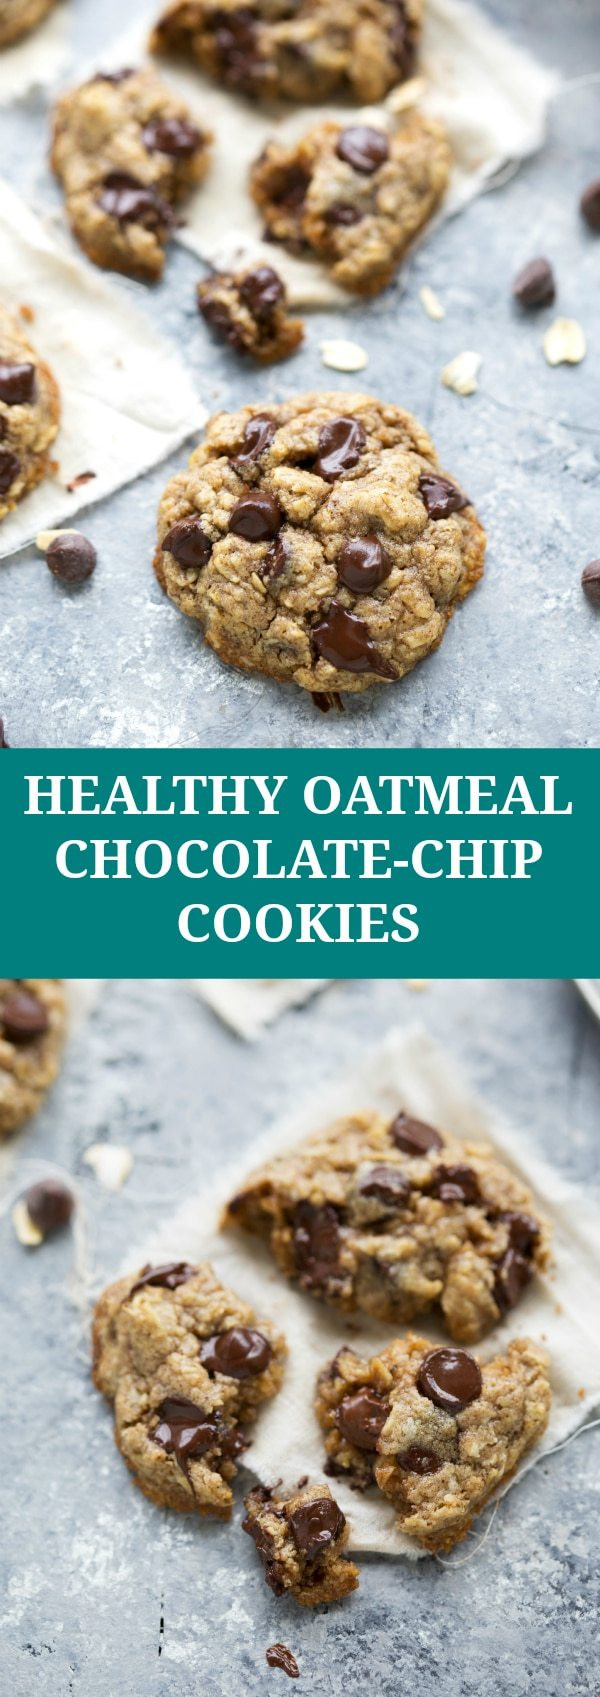 Oat Chocolate Chip Cookies Healthy
 The BEST healthy oatmeal chocolate chip cookies Chelsea